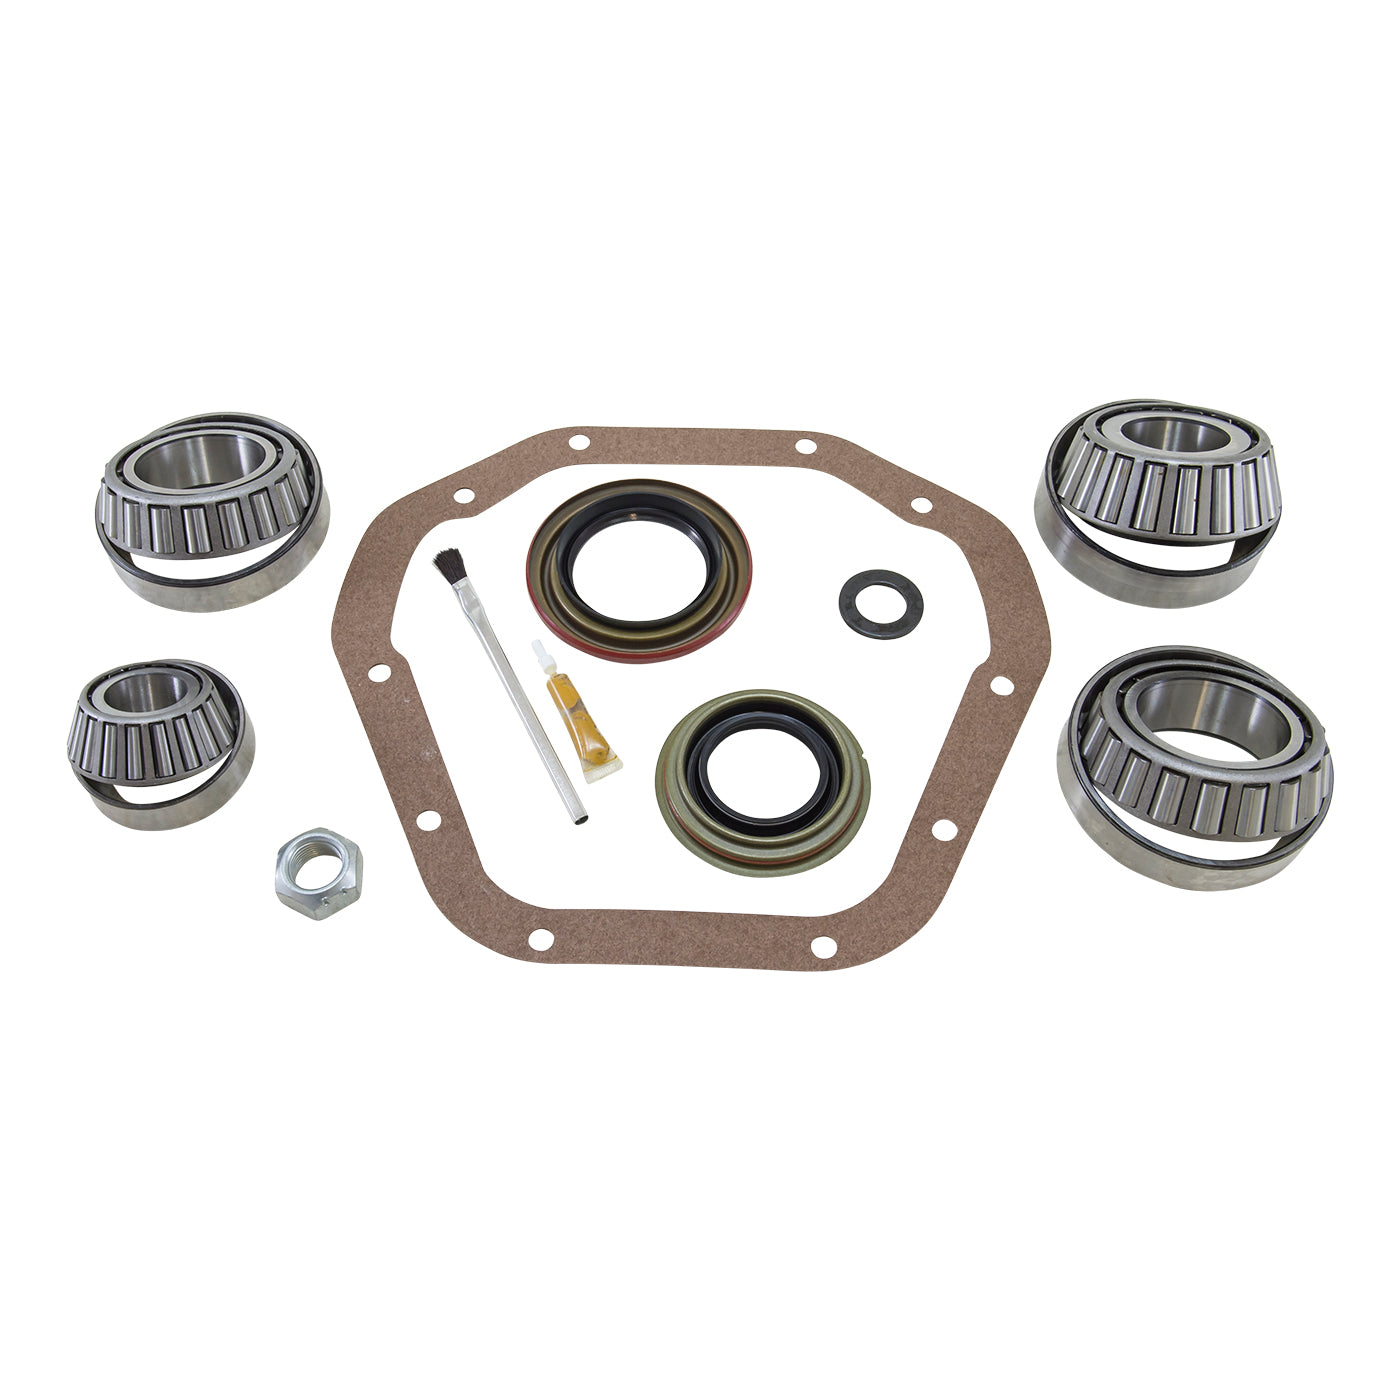 Yukon Gear Bearing install kit for Ford 10.25" differential BK F10.25